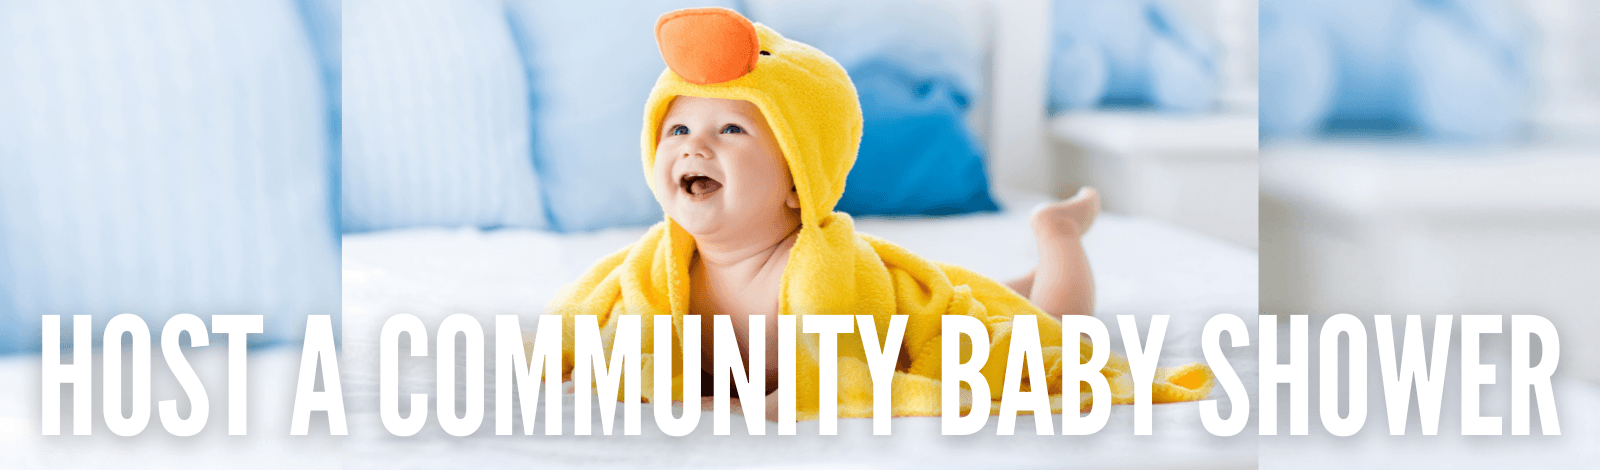 Host a Community Baby Shower